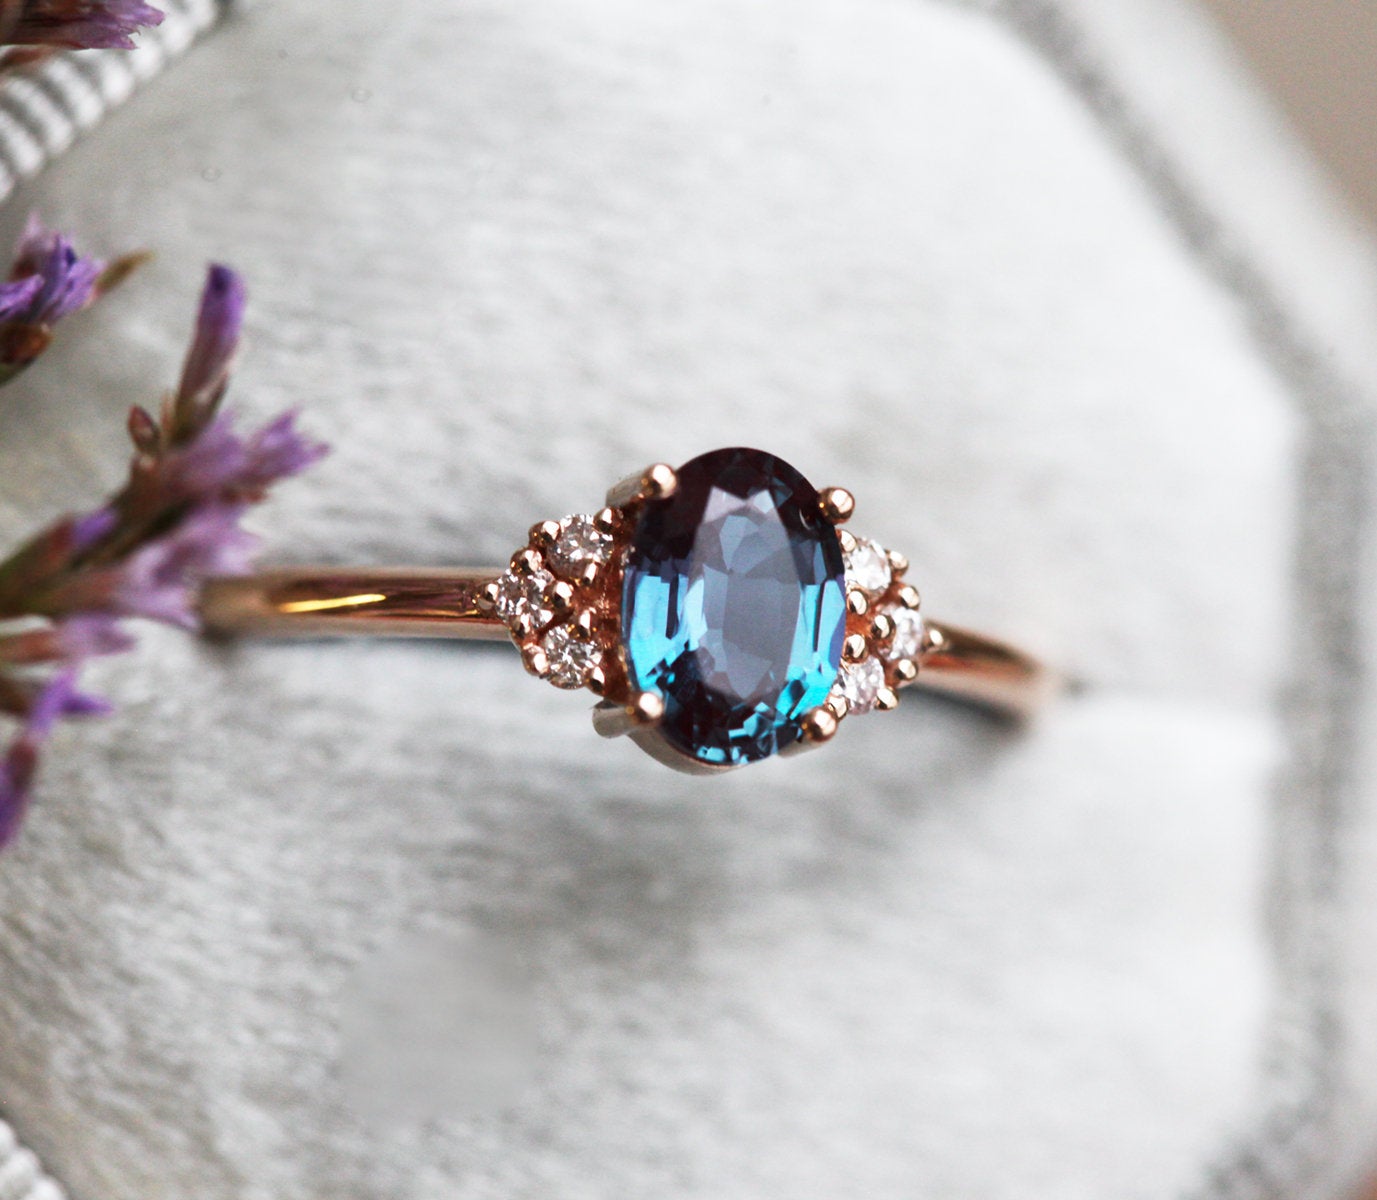 Teal Oval Alexandrite Ring Set with Nesting Band holding White Diamonds